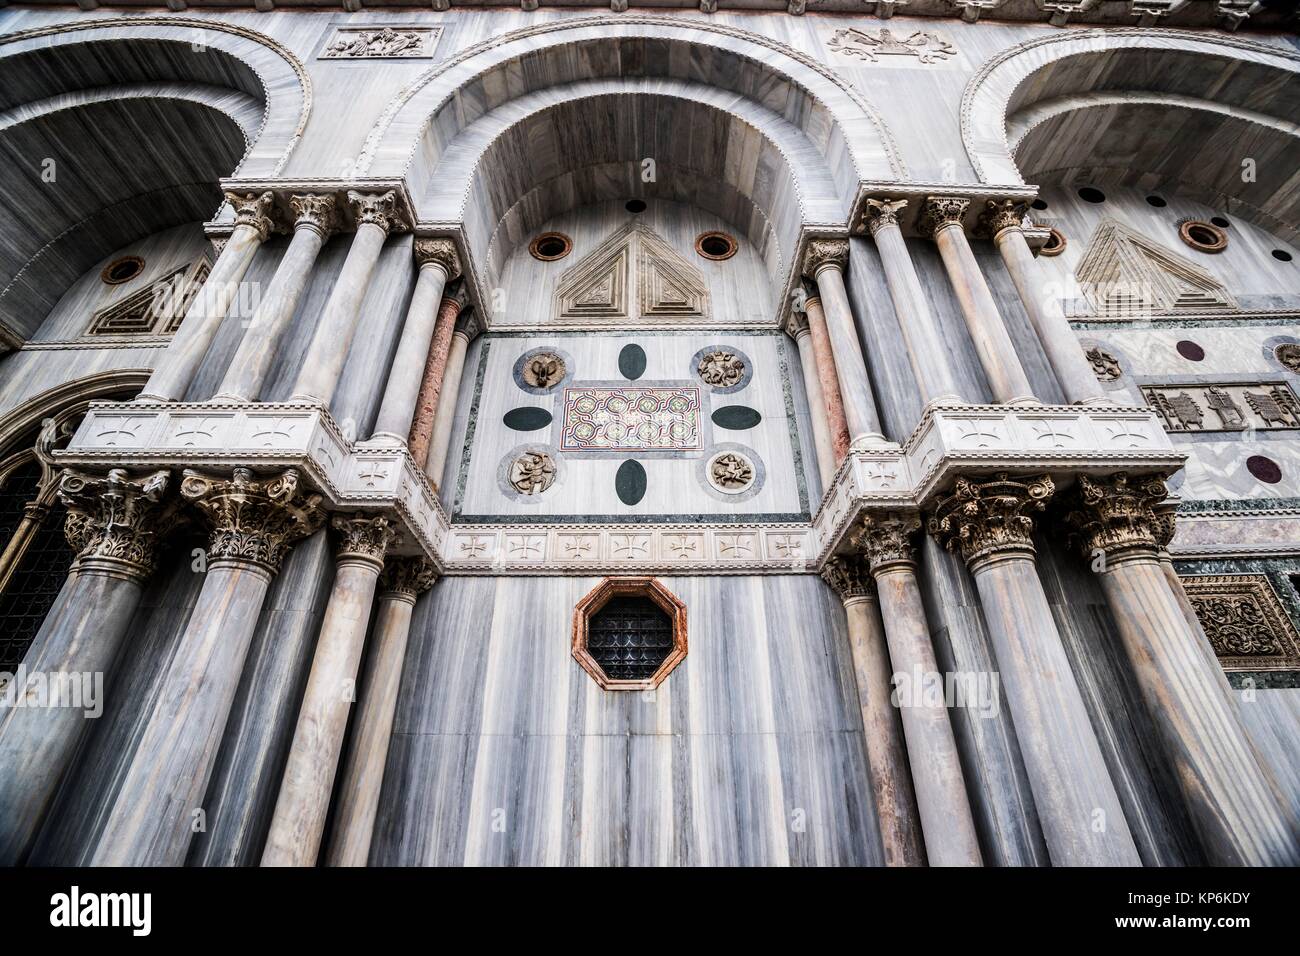 Detail of the exterior of the Basilica di San Marco (St. Mark's Basilica) with emphasis on the marble, columns, and ornamentation. Piazza San Marco, Stock Photo